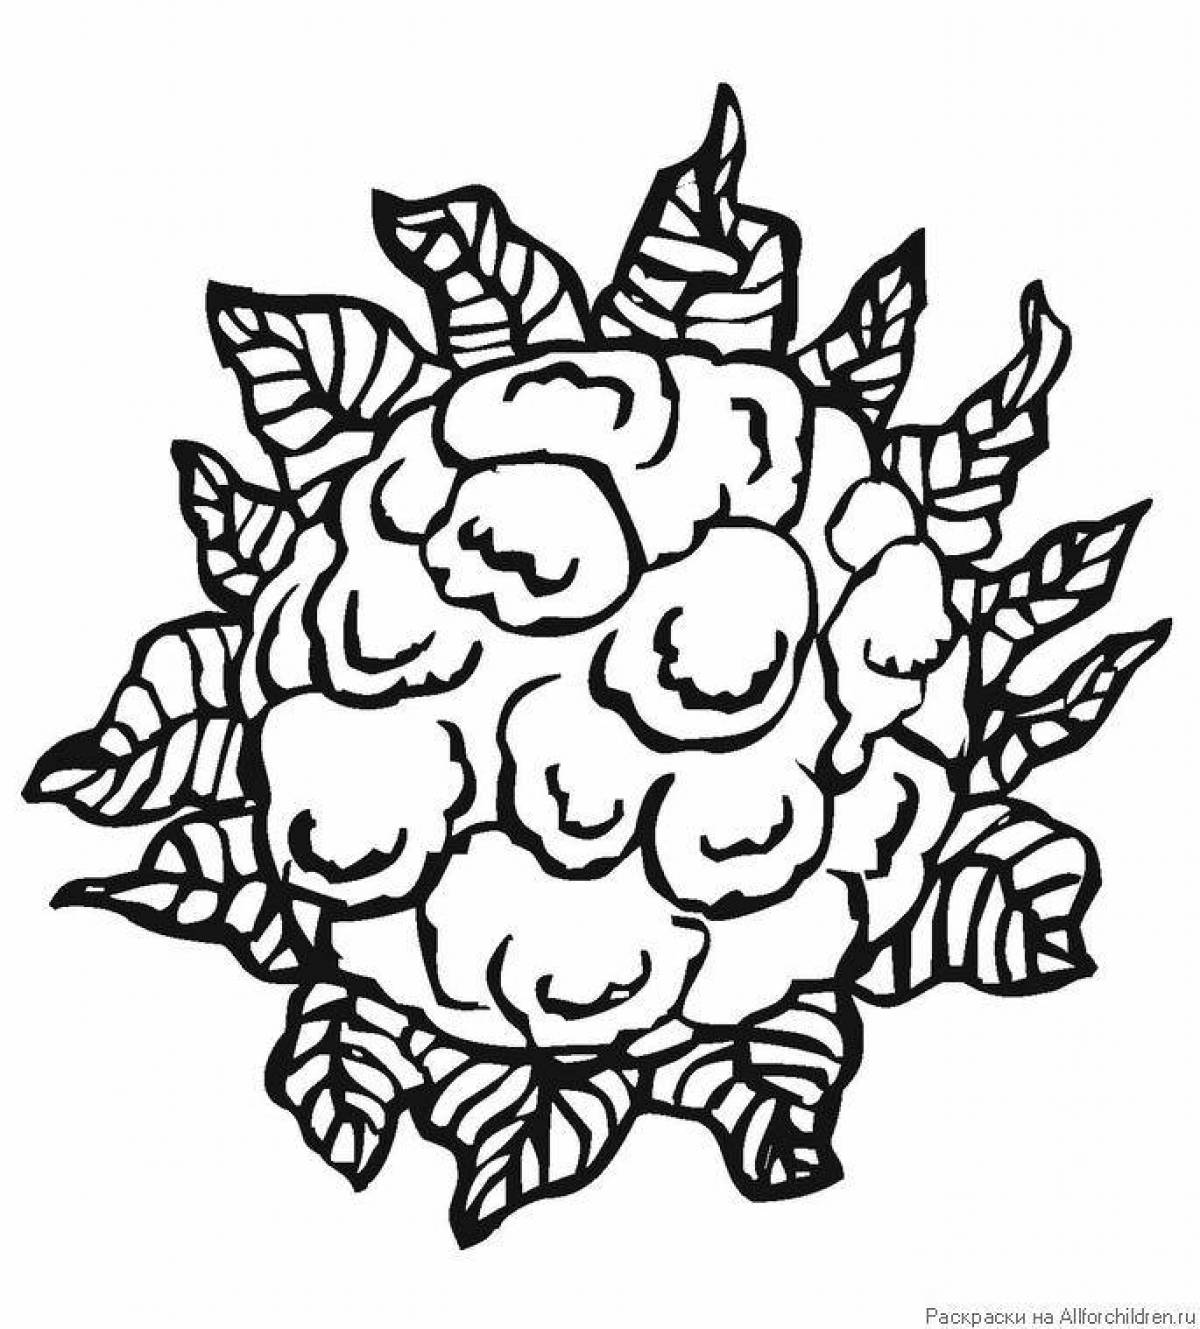 Charming cauliflower coloring page